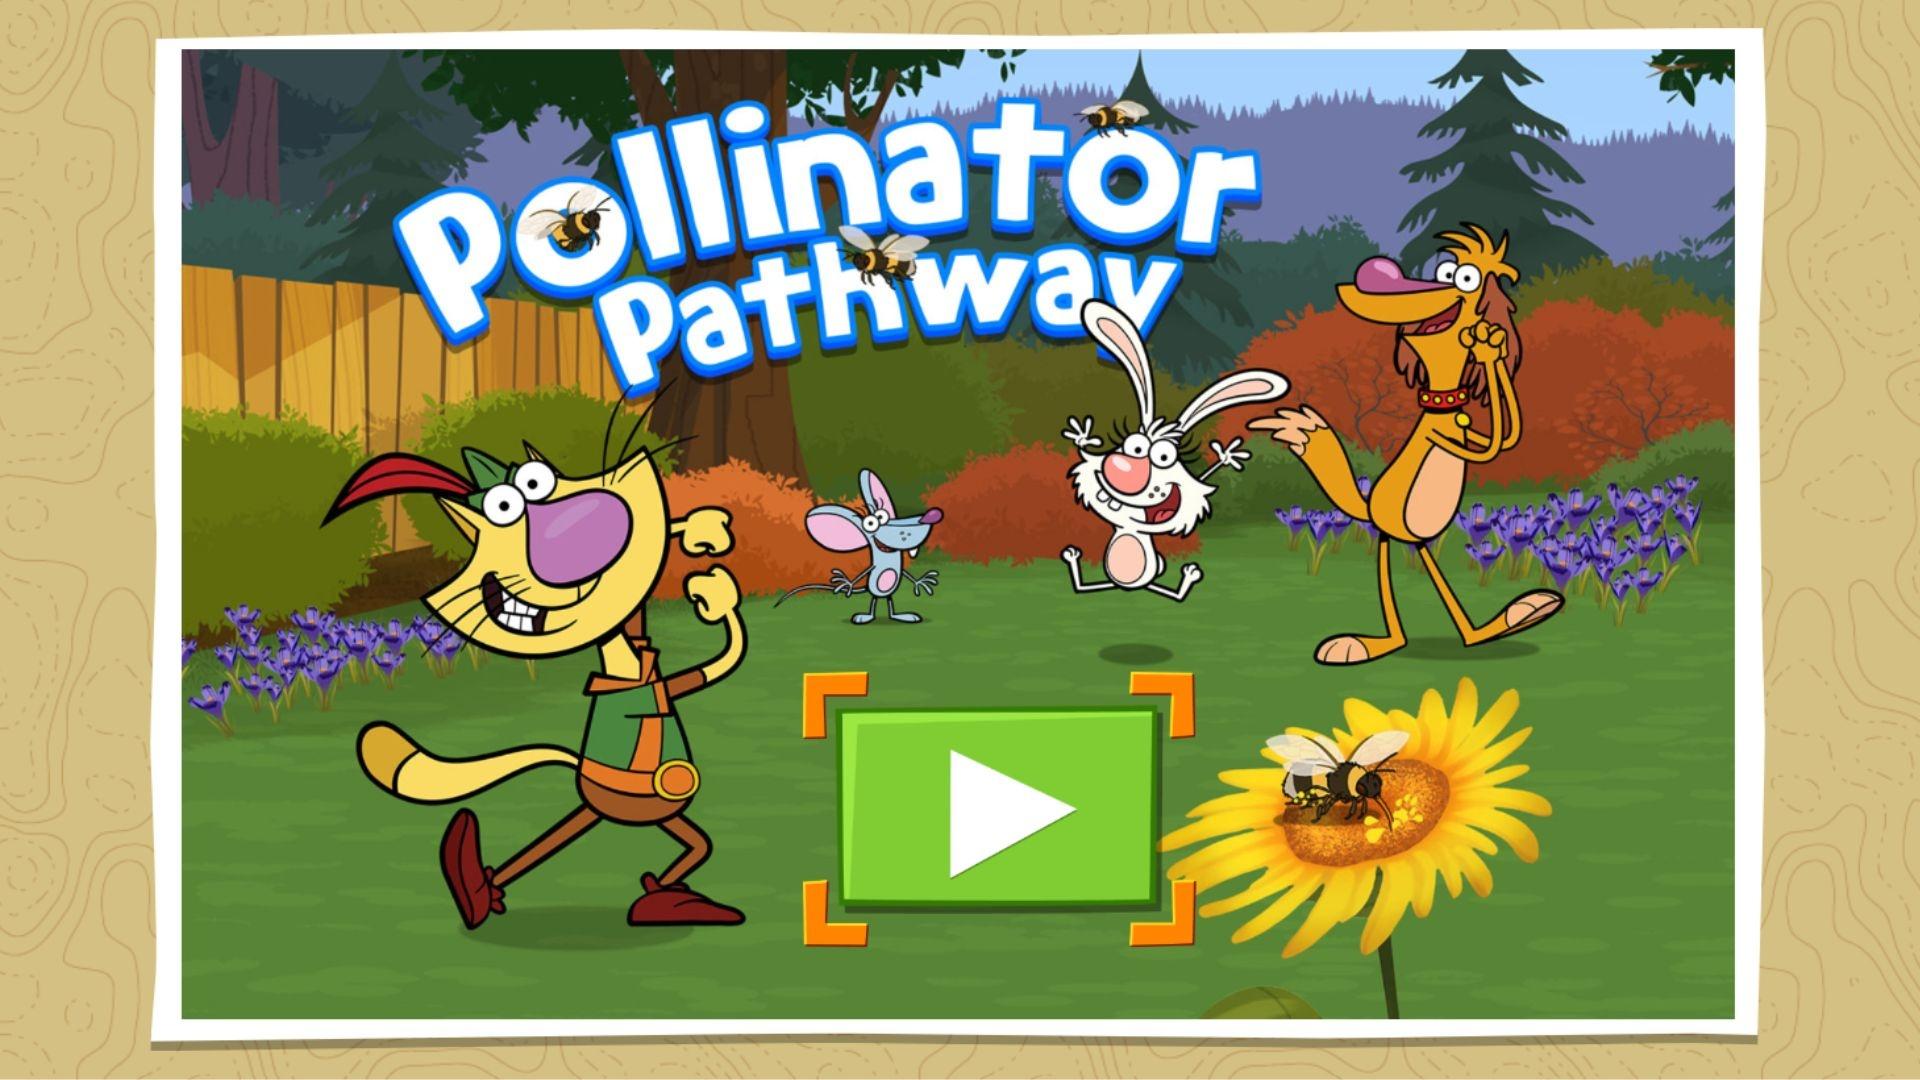 The PBS KIDS game, "Pollinator Pathway" from Nature Cat.